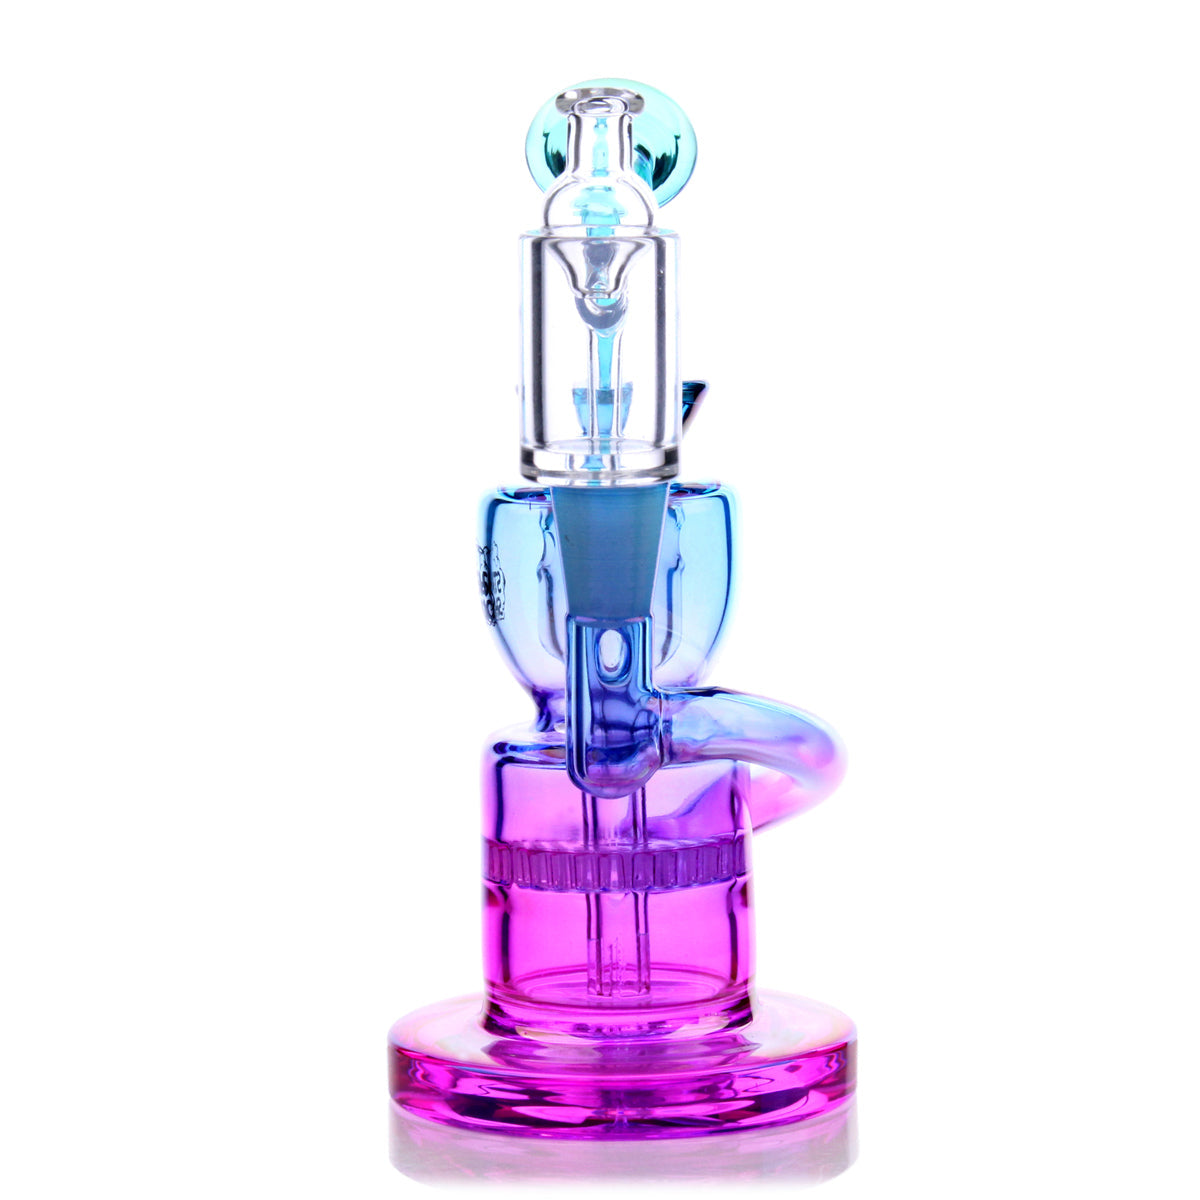 Dahlia Mini Rig in Purple - Compact 5.5" Dab Rig with Honeycomb Percolator, 90 Degree Joint